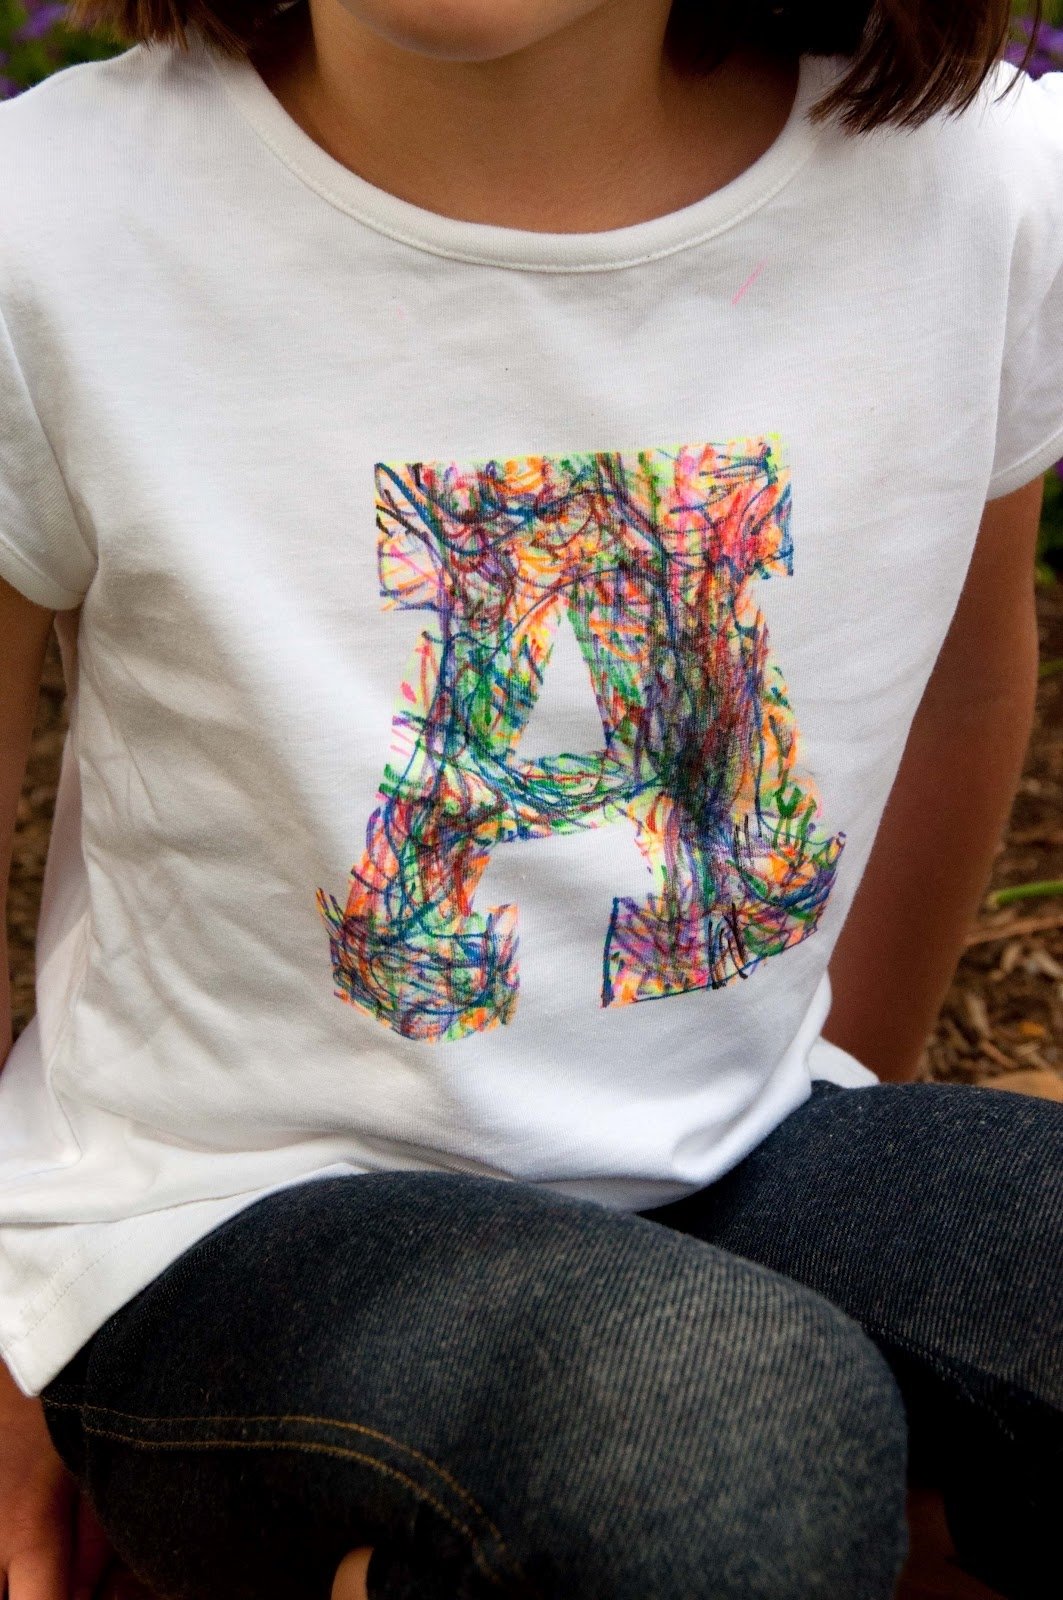 10 Stylish Puffy Paint T Shirt Ideas freezer paper stencils use sharpies or fabric markers to scribble 2023